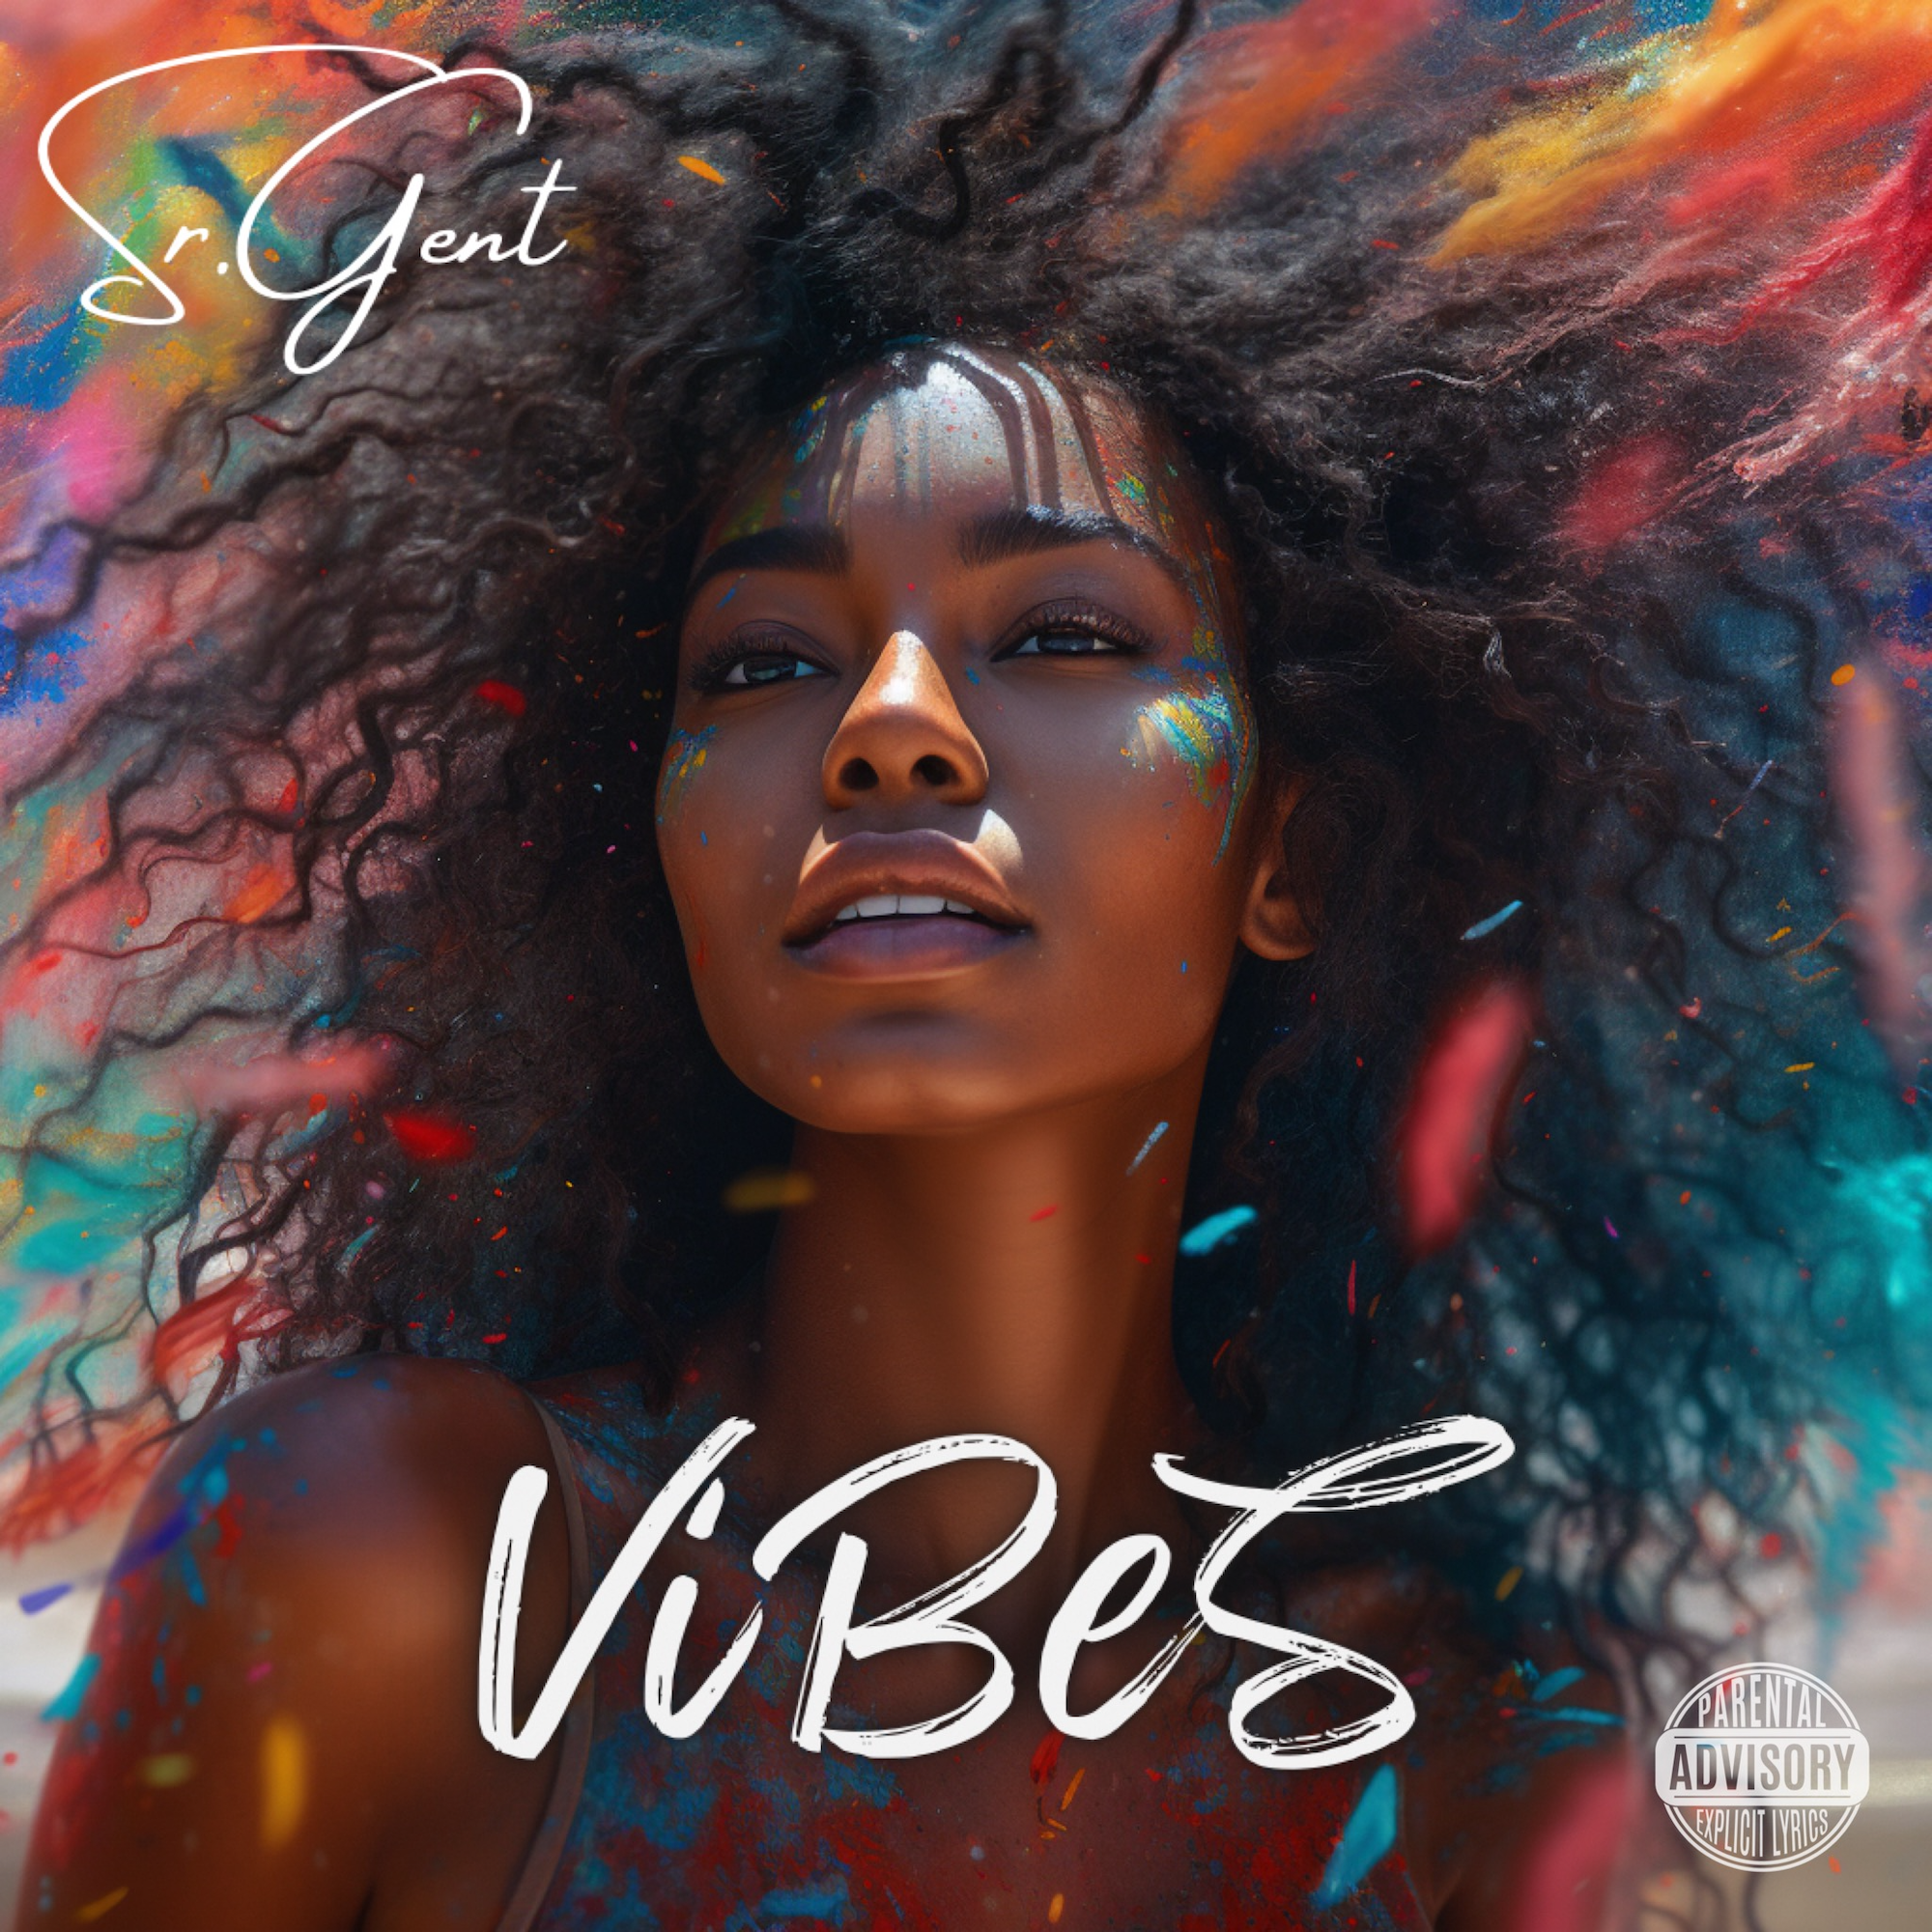 Vibes official cover art